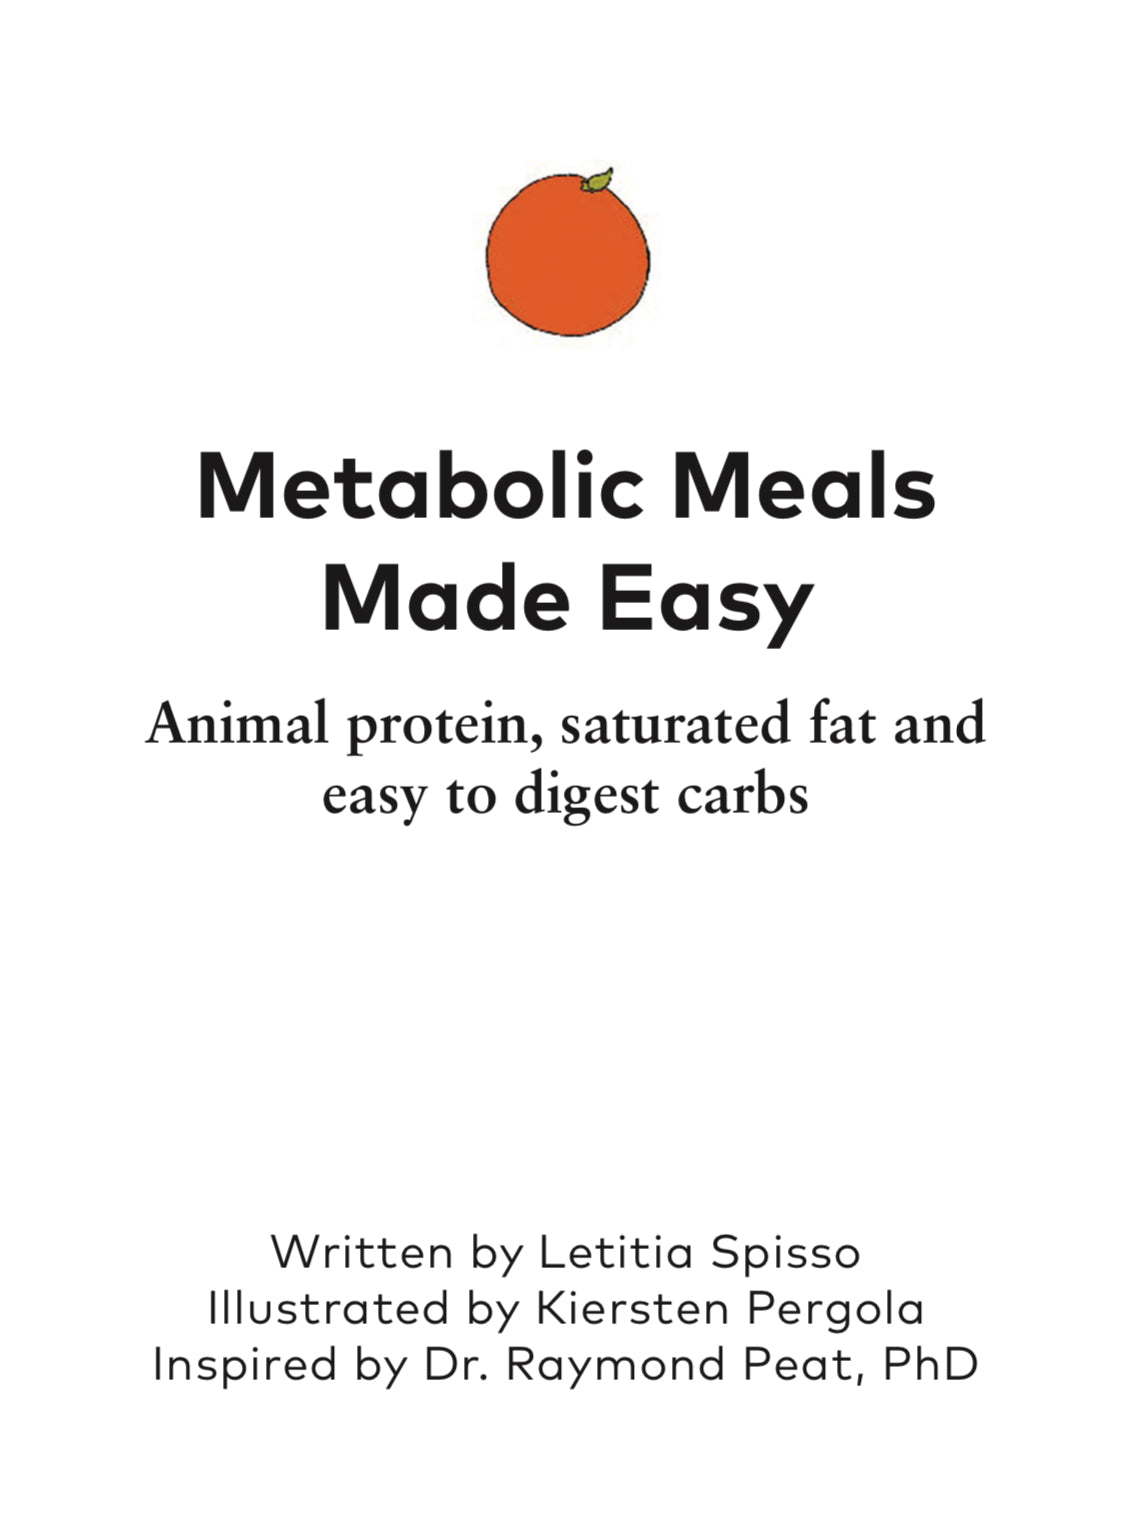 Metabolic Meals Made Easy by Letitia Spisso